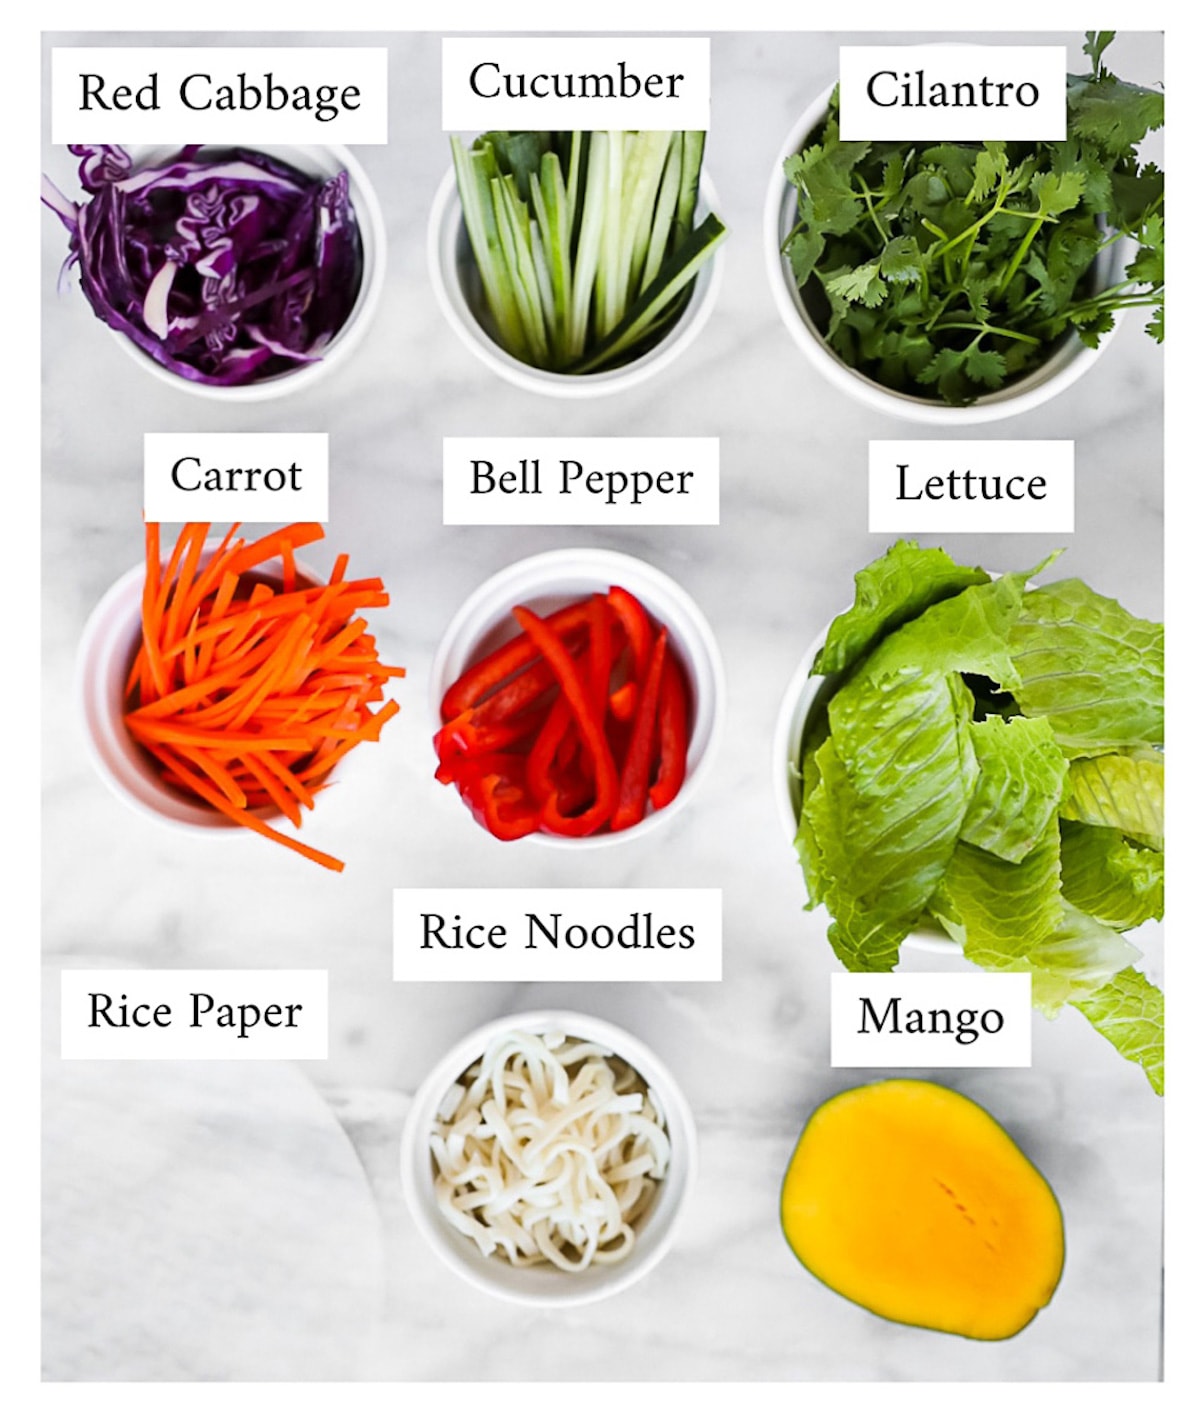 Labeled ingredients including: red cabbage, cucumber, cilantro, carrot, bell pepper, lettuce, rice paper, rice noodles, mango.